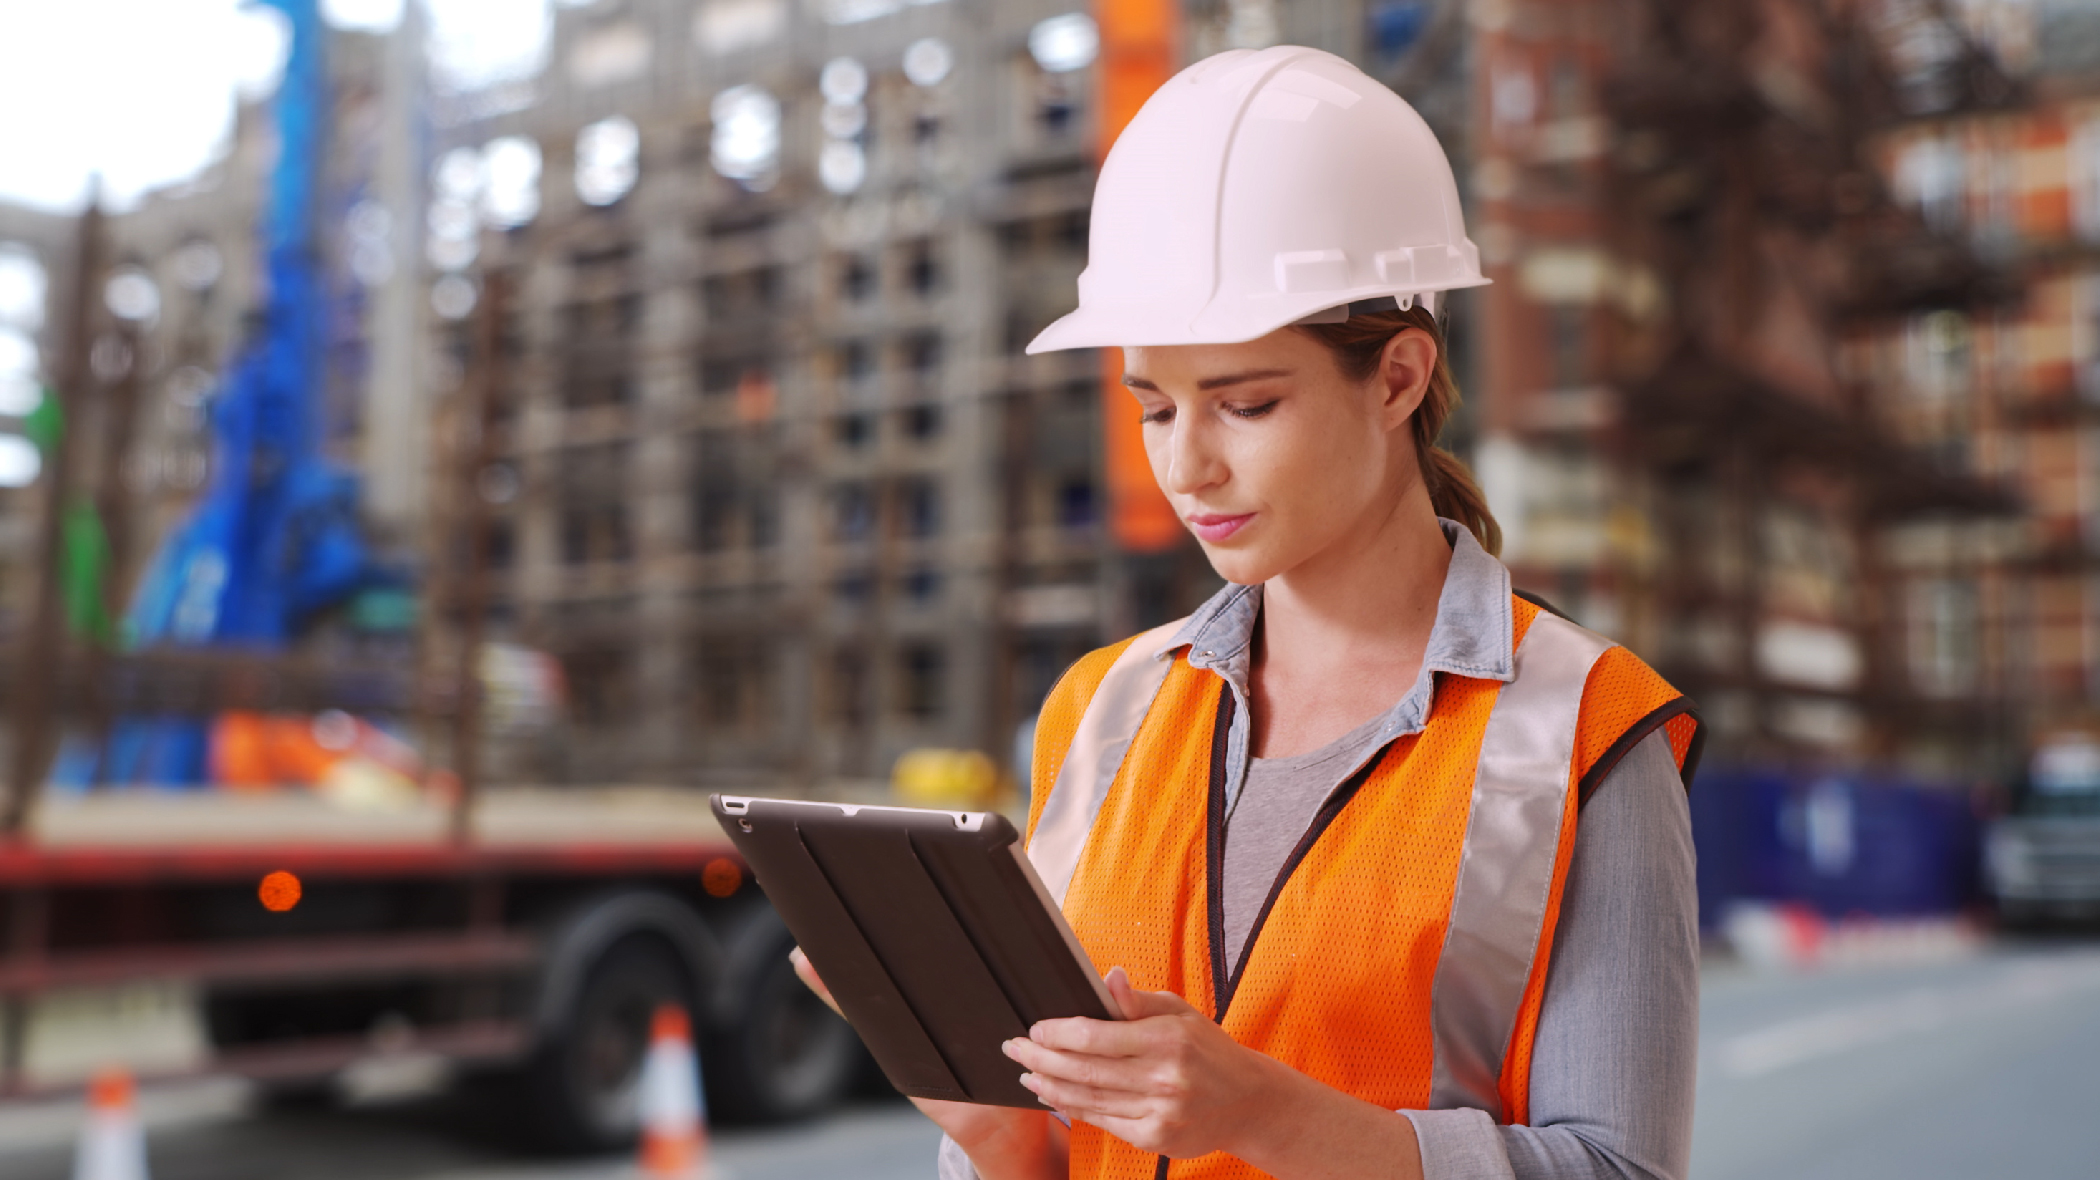 Woman wearing a hard hat and safetly vest holds a tablet device in her hand at an outdoor construction site.